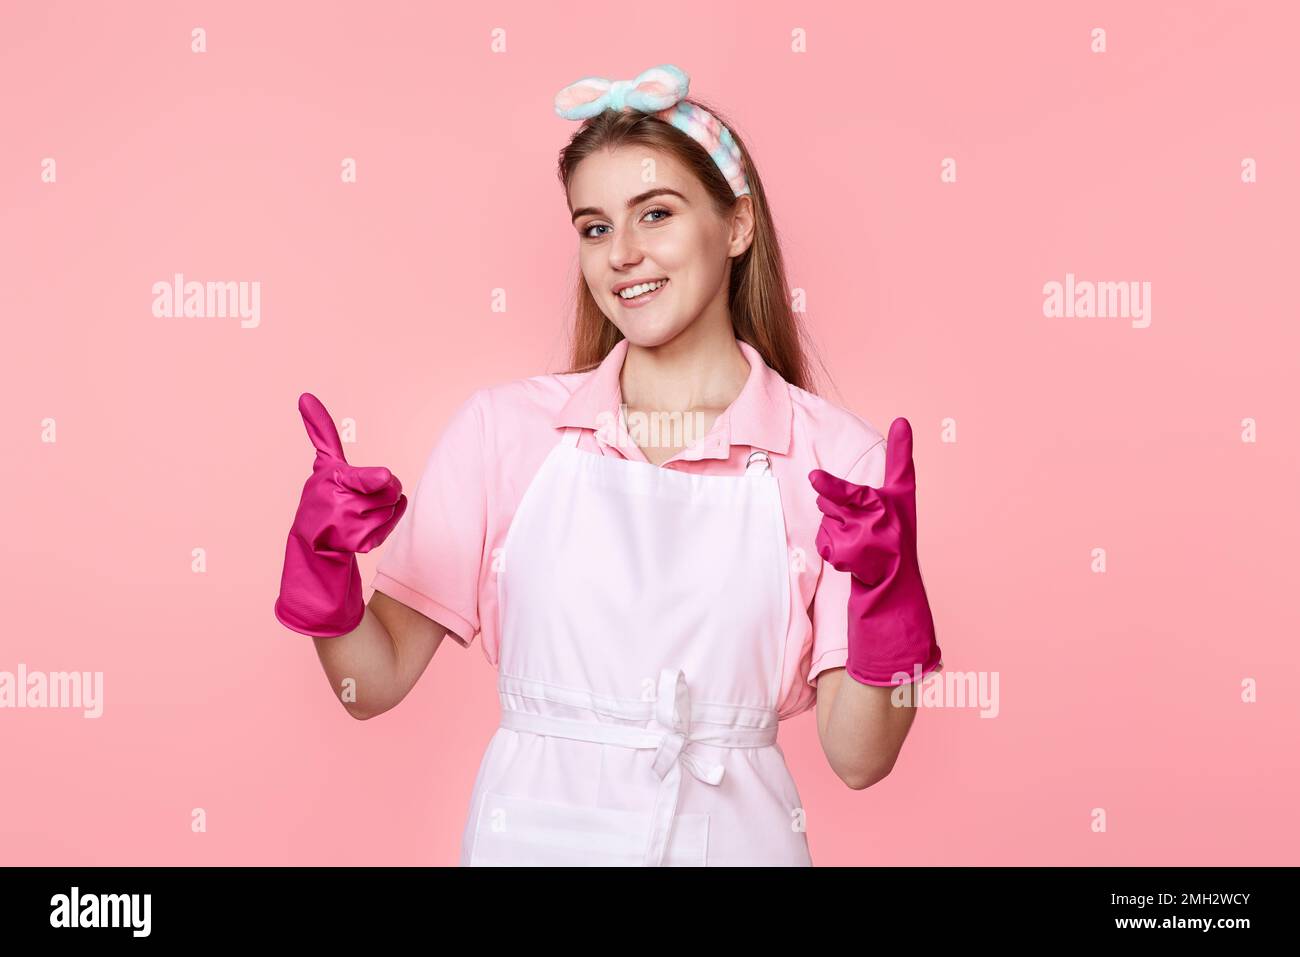 woman in rubber gloves and cleaner apron pointing fingers to camera Stock Photo